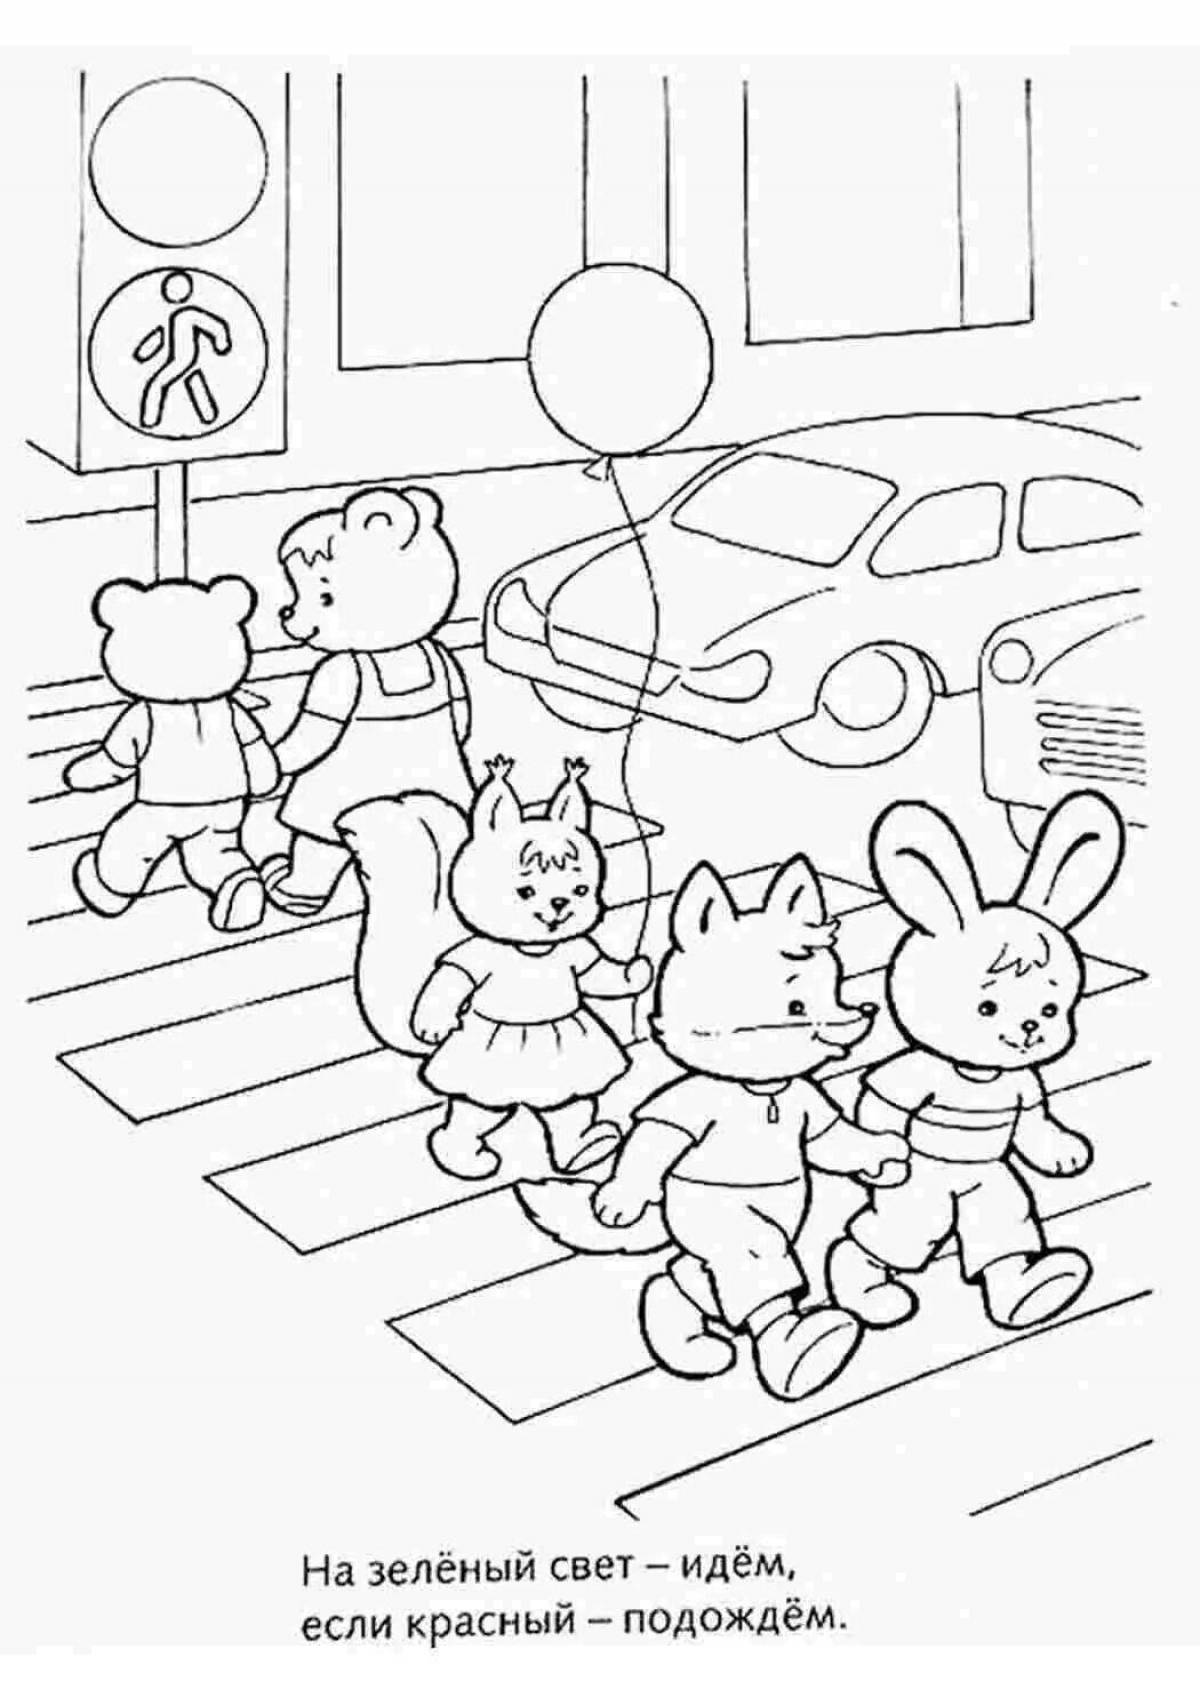 Safety fun coloring book for 6-7 year olds